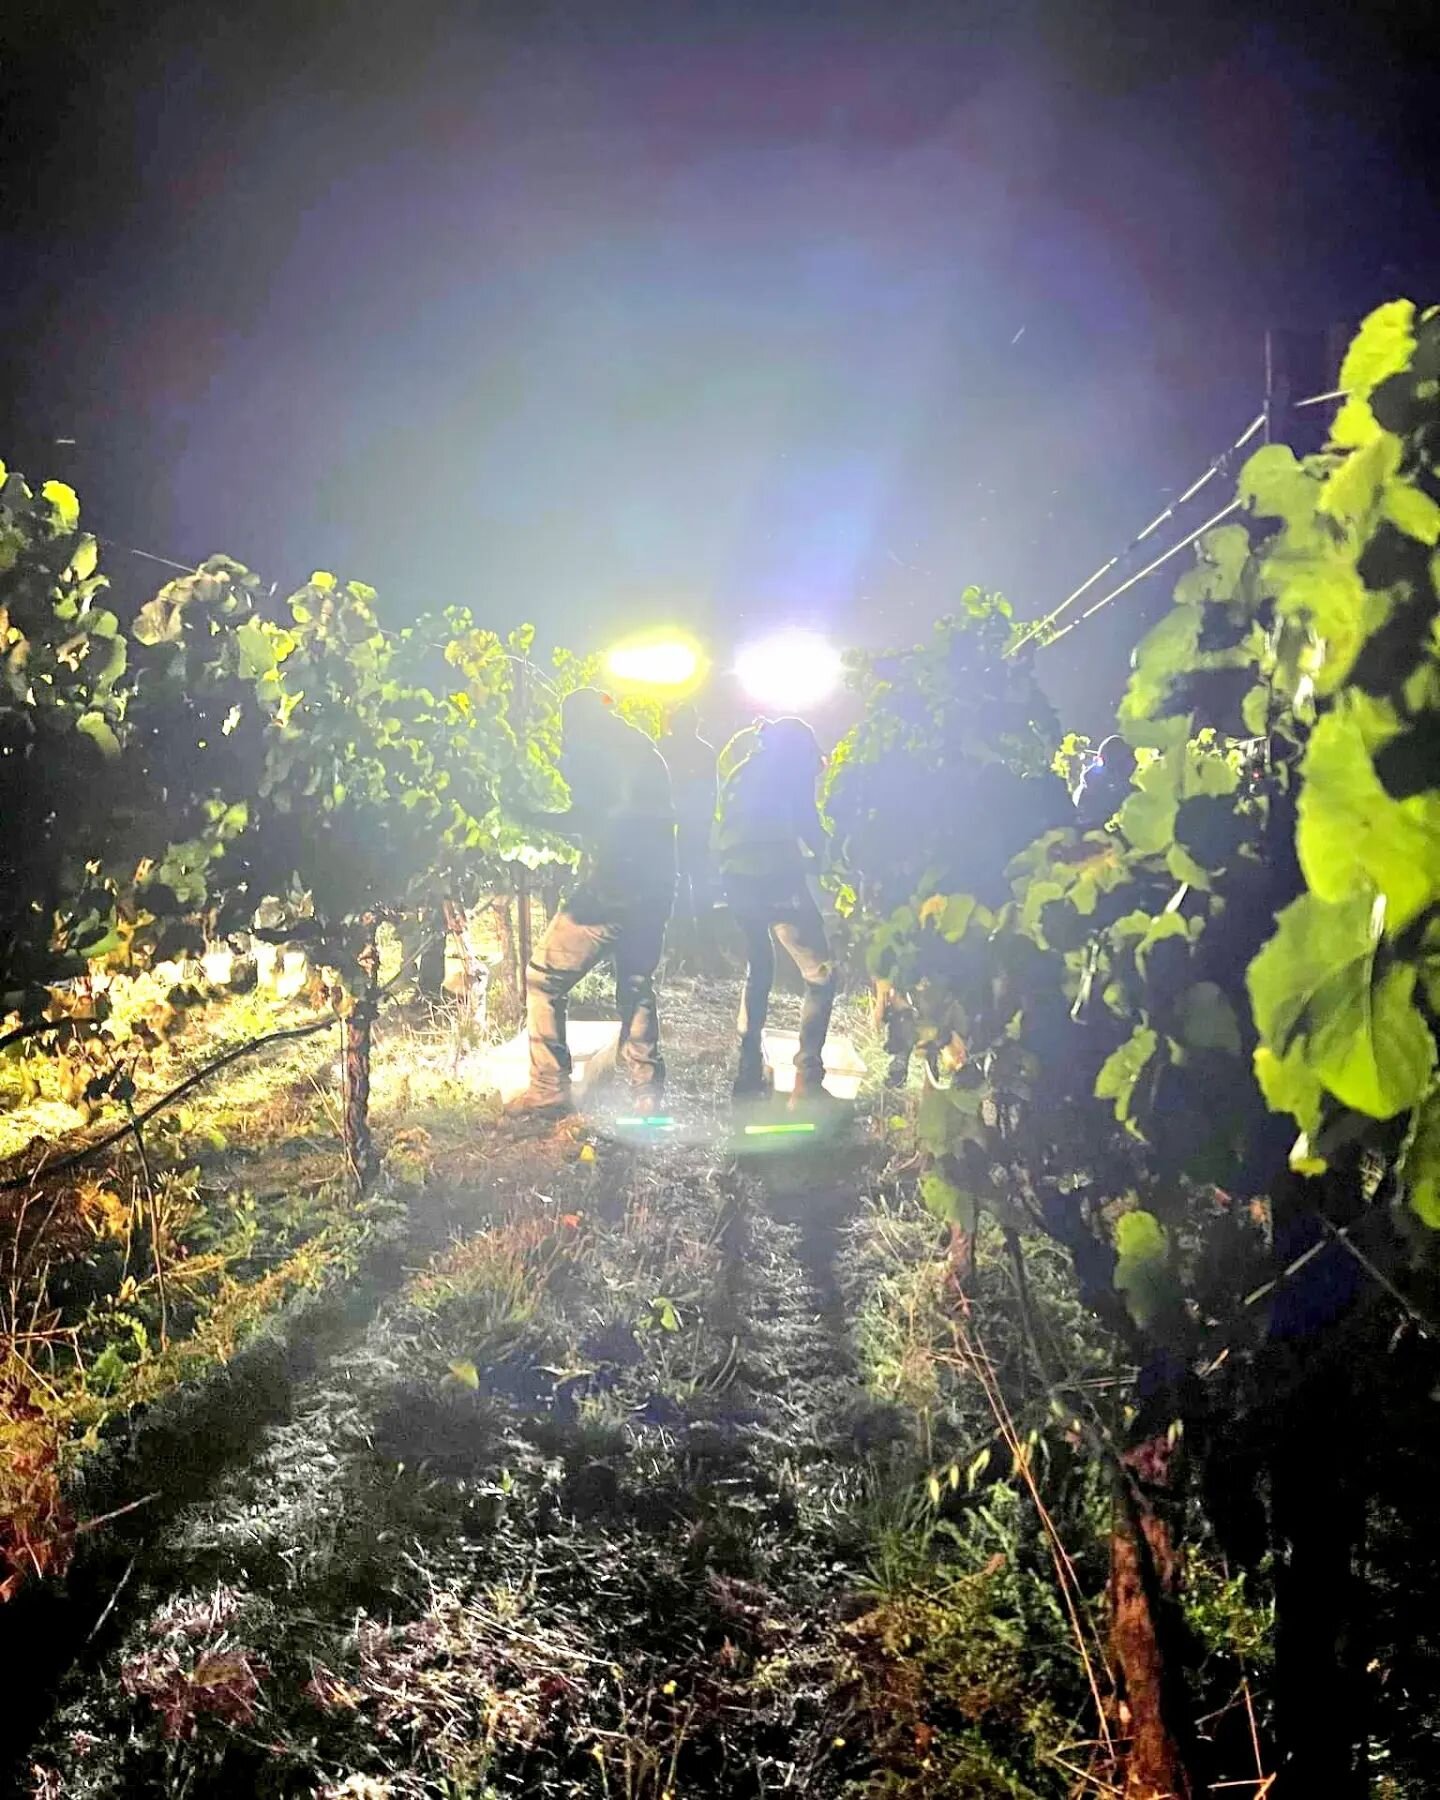 The last night of harvest 2022 in Brokenrock Vineyard ended with our Petit Verdot. 

Feeling thankful to everyone who made it possible. 

Early budbreak allowed us to reach lovely phenolic complexity in time for a fairly early pick. A hard frost in t